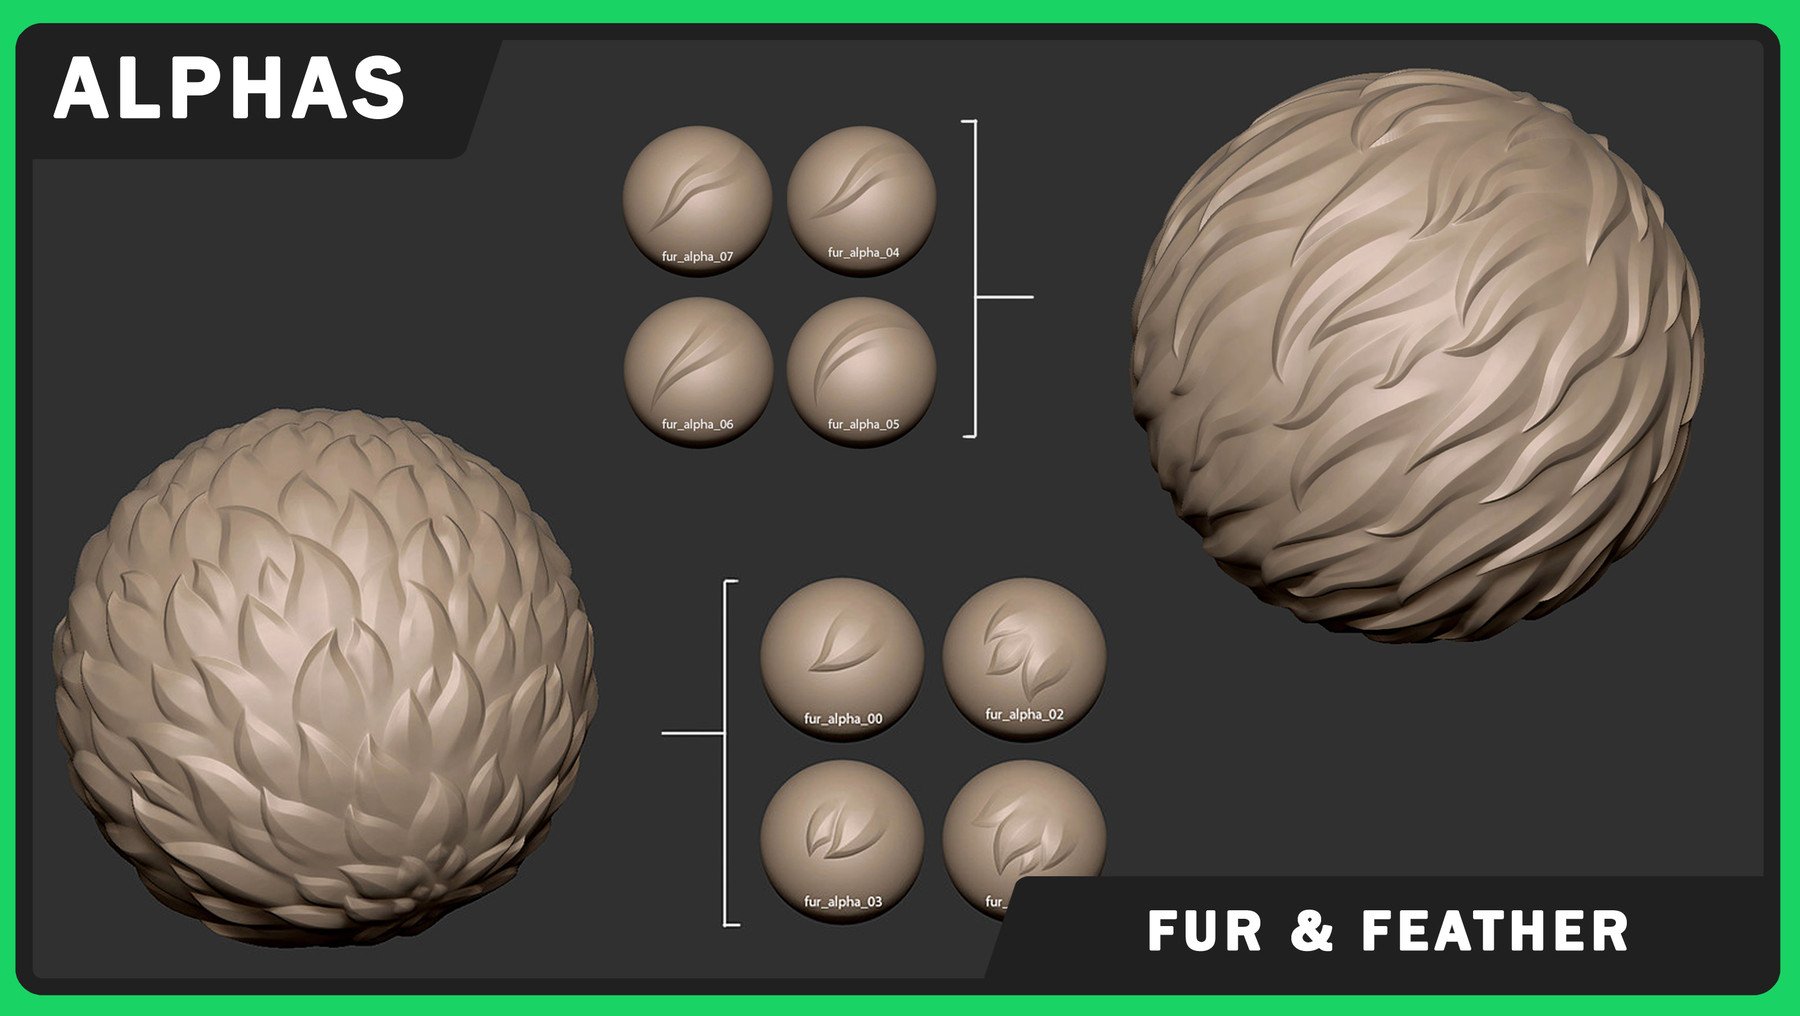 ArtStation - Stylized Fur And Feather Alphas | Brushes